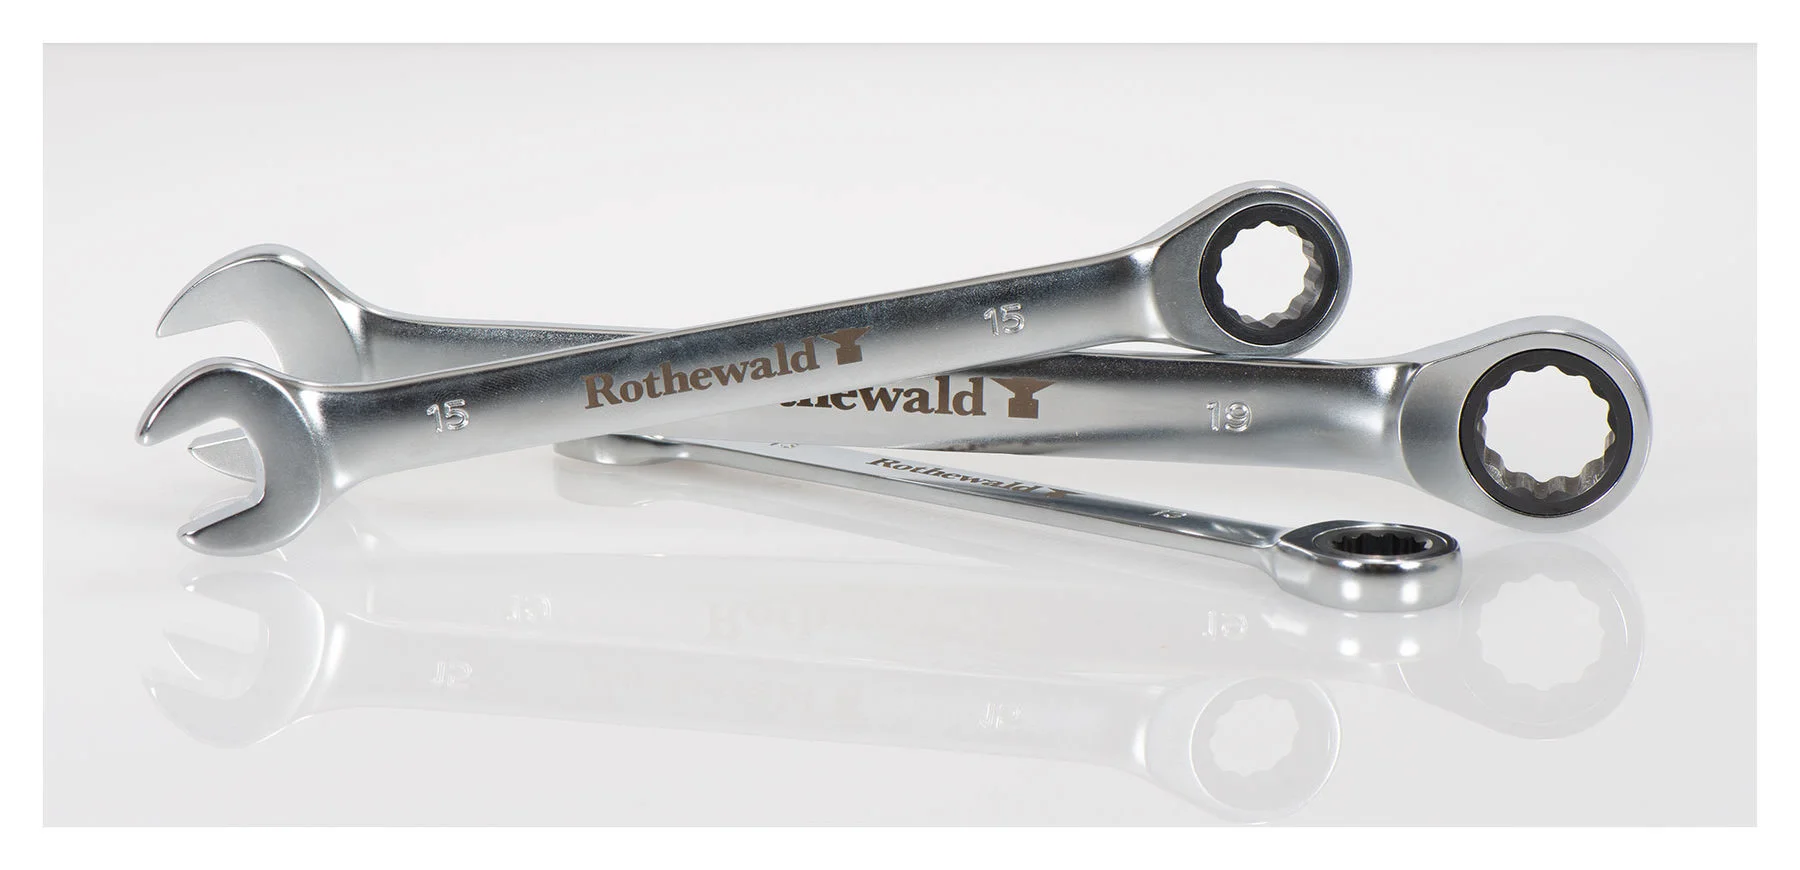 ROTHEWALD RATCHET WRENCH